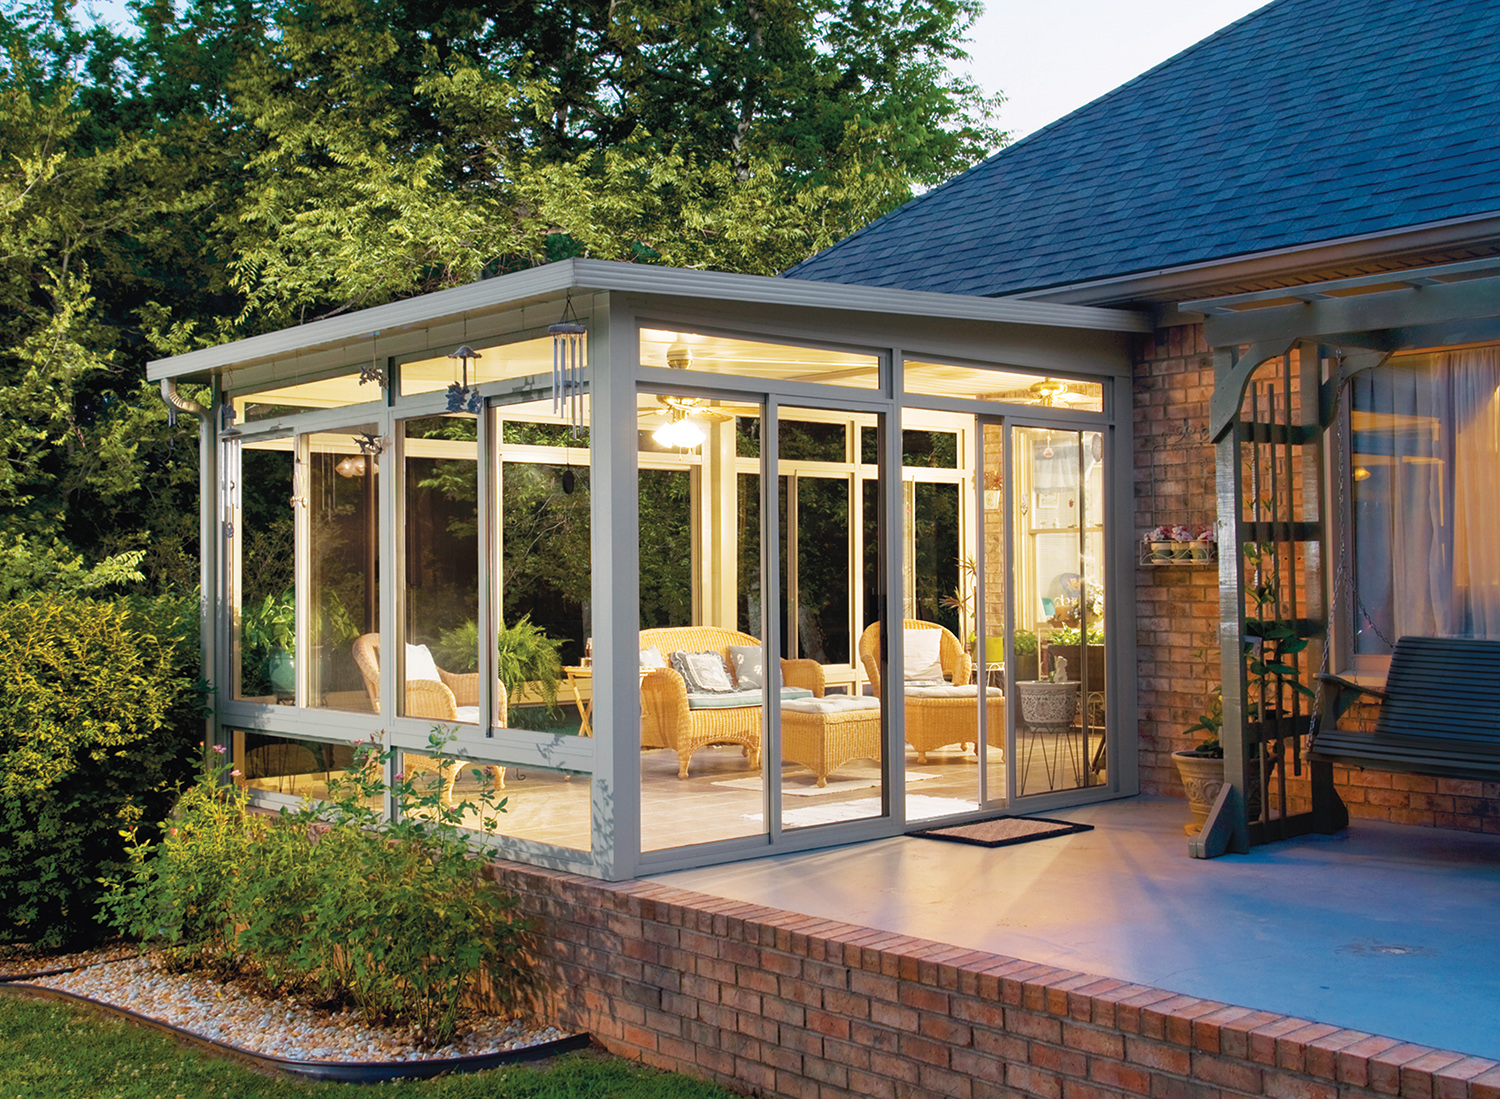 Sunroom installers and their supplier organizations are significant